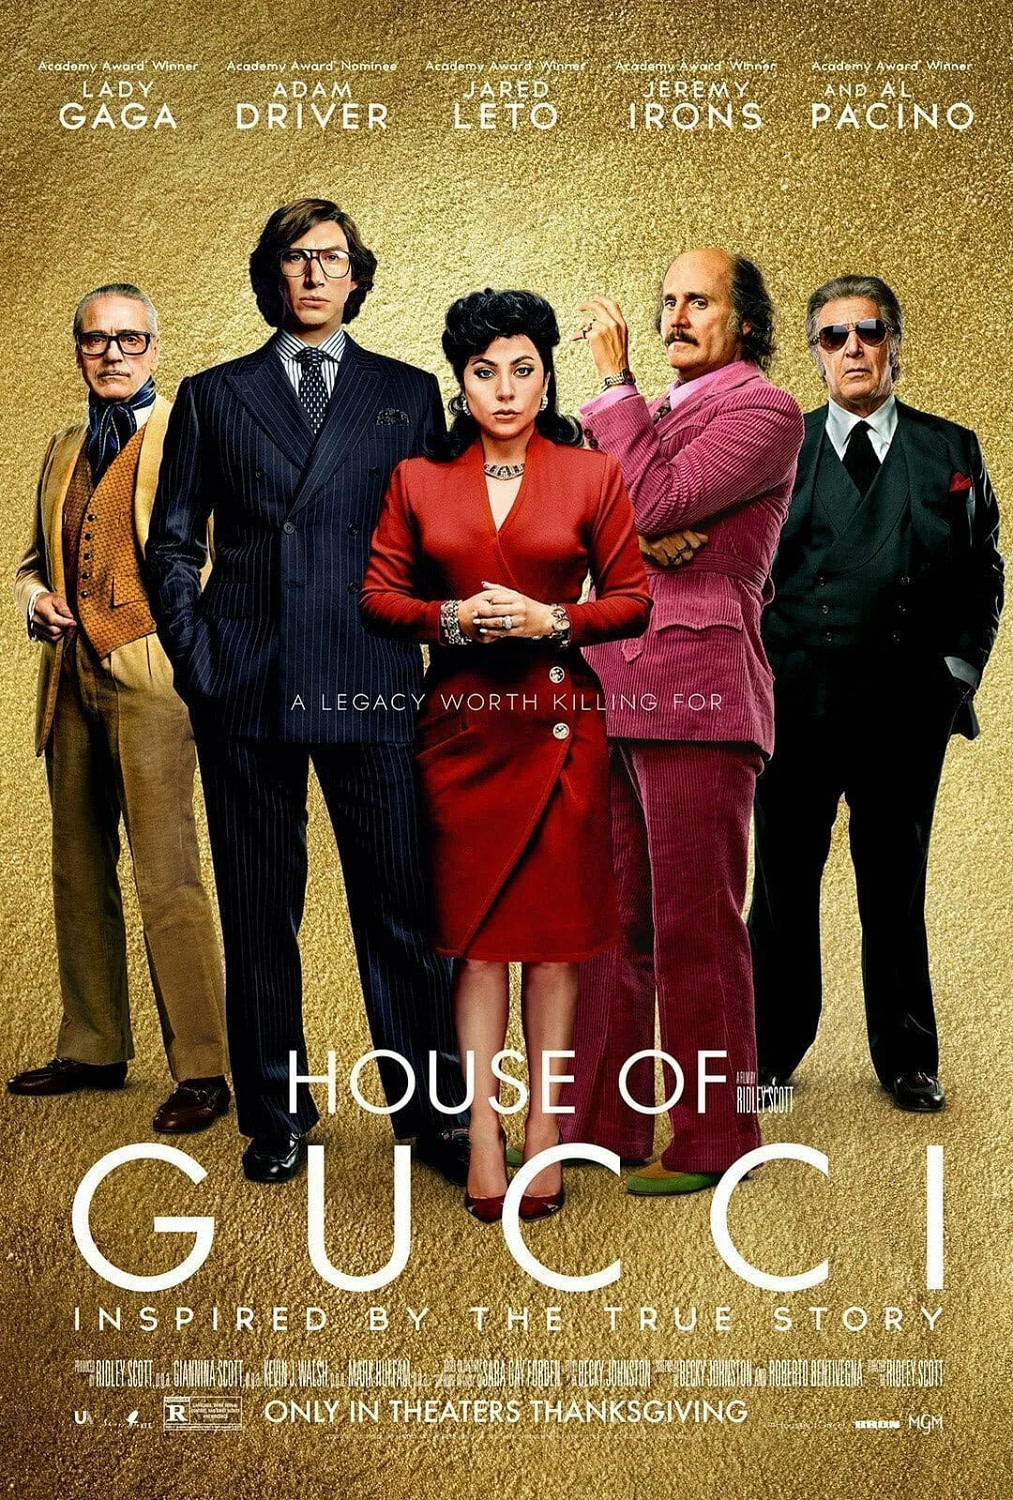 HOUSE OF GUCCI – starring Lady Gaga, Adam Driver, Jared Leto, Jeremy Irons, and Al Pacino